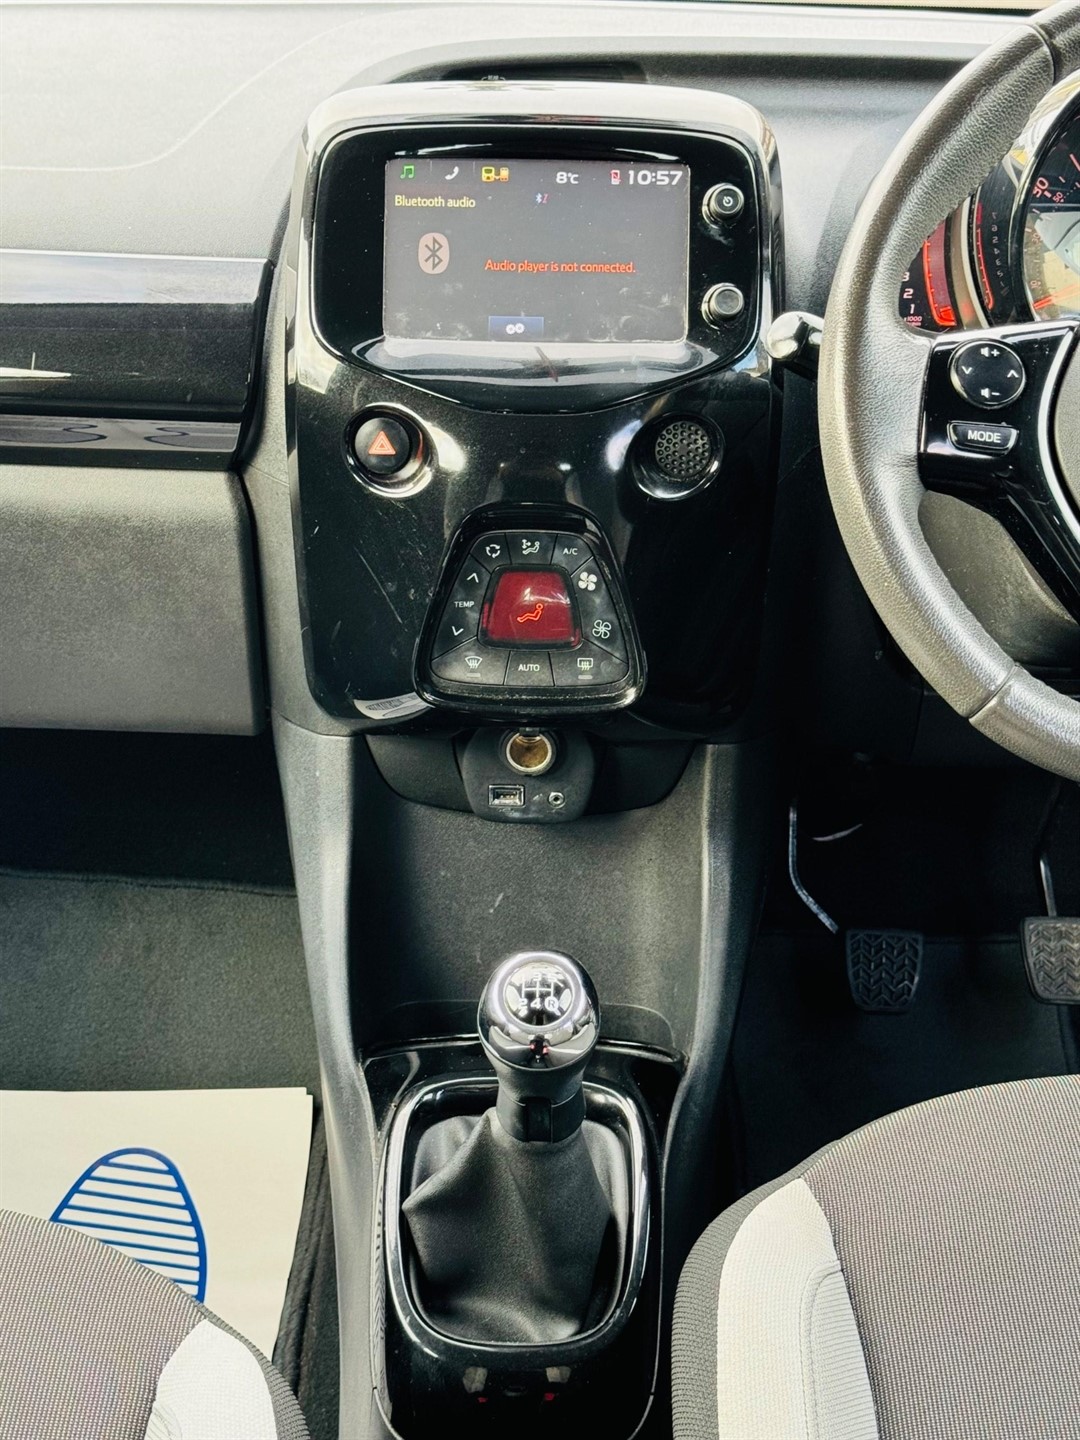 Used Toyota Aygo for sale in North Harrow, Middlesex